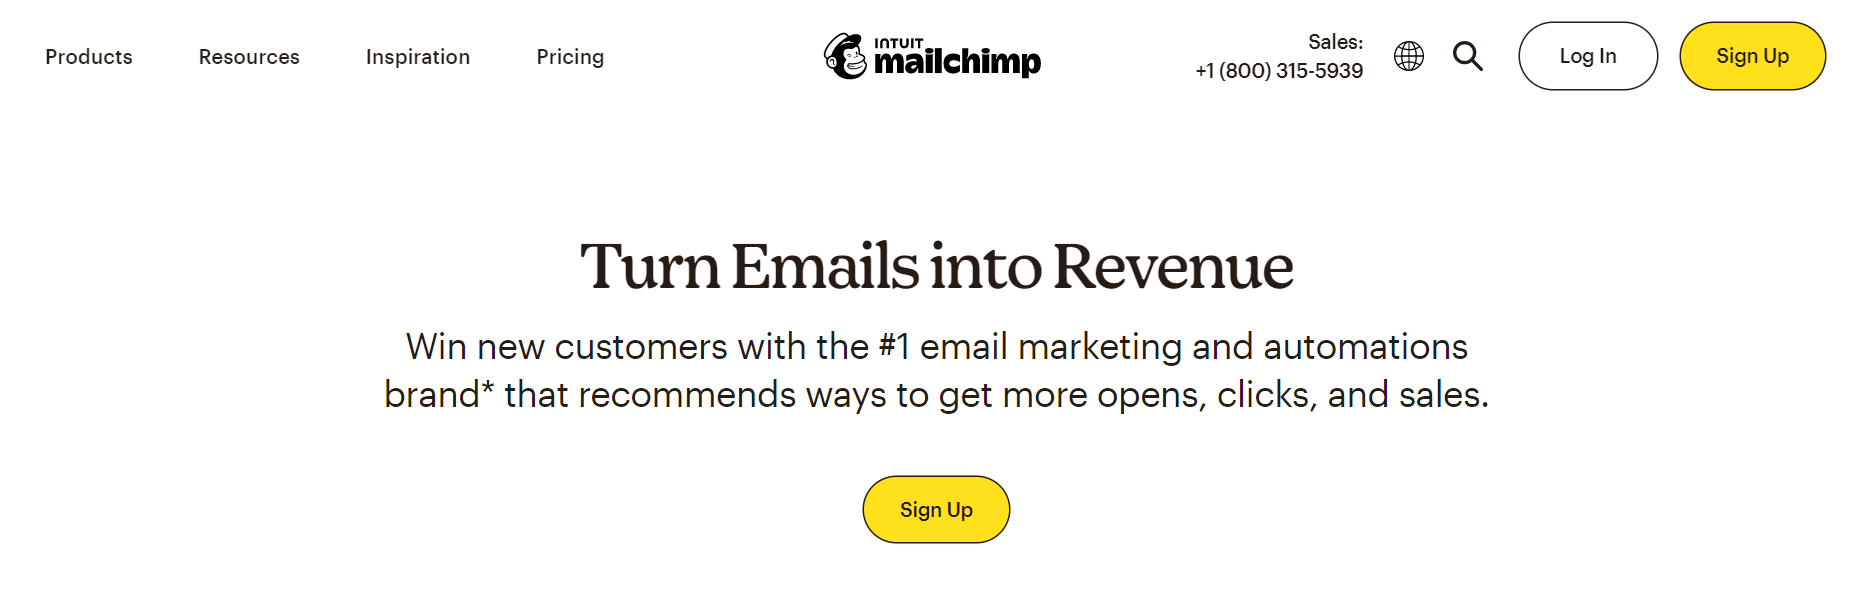 Sign Up for Free in mailchimp